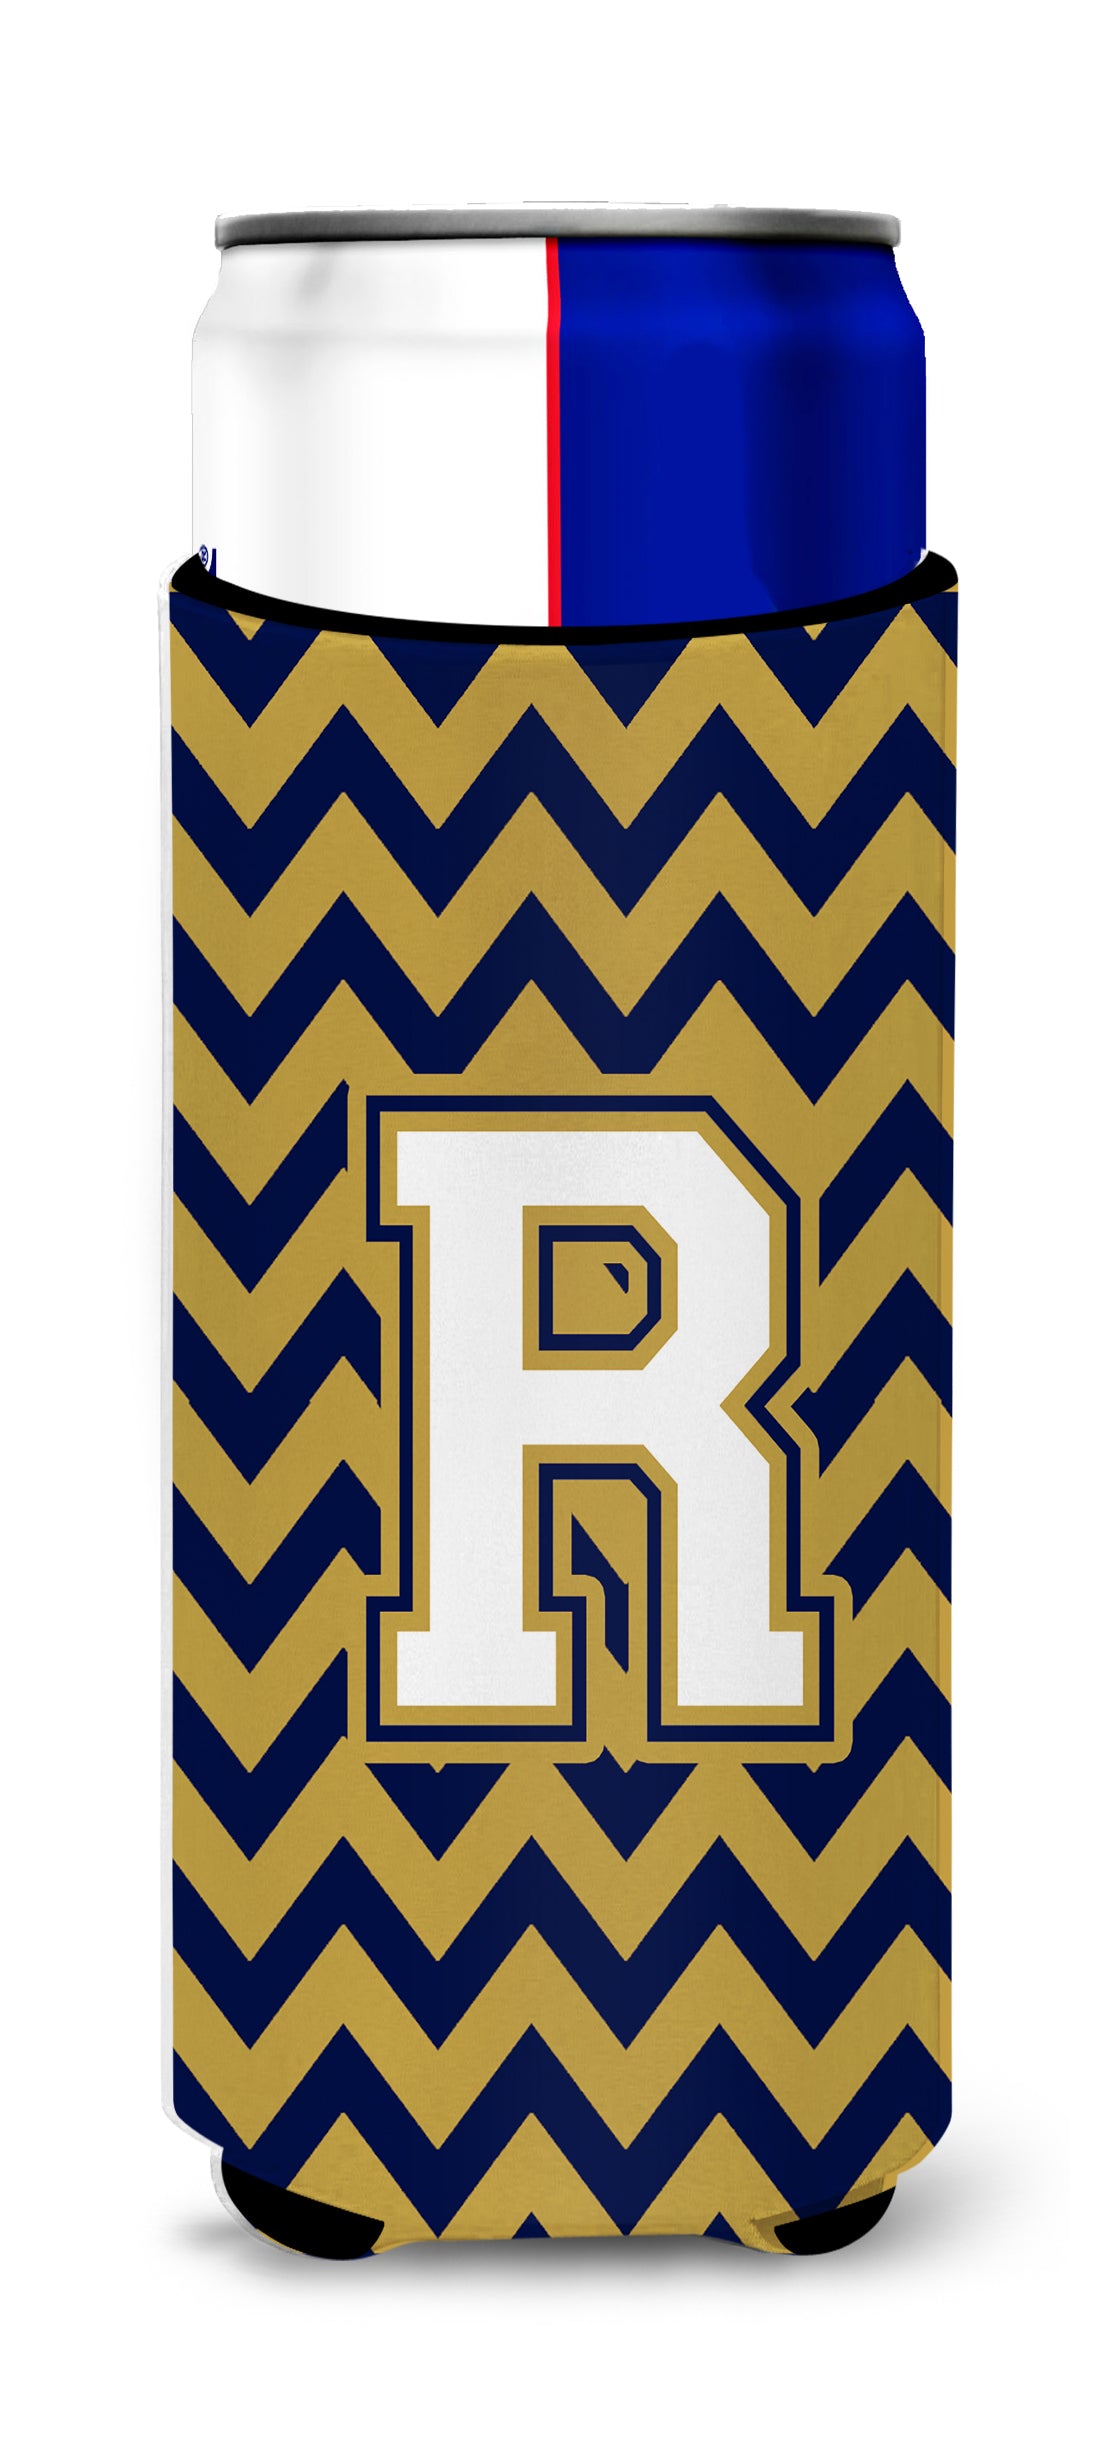 Letter R Chevron Navy Blue and Gold Ultra Beverage Insulators for slim cans CJ1057-RMUK.